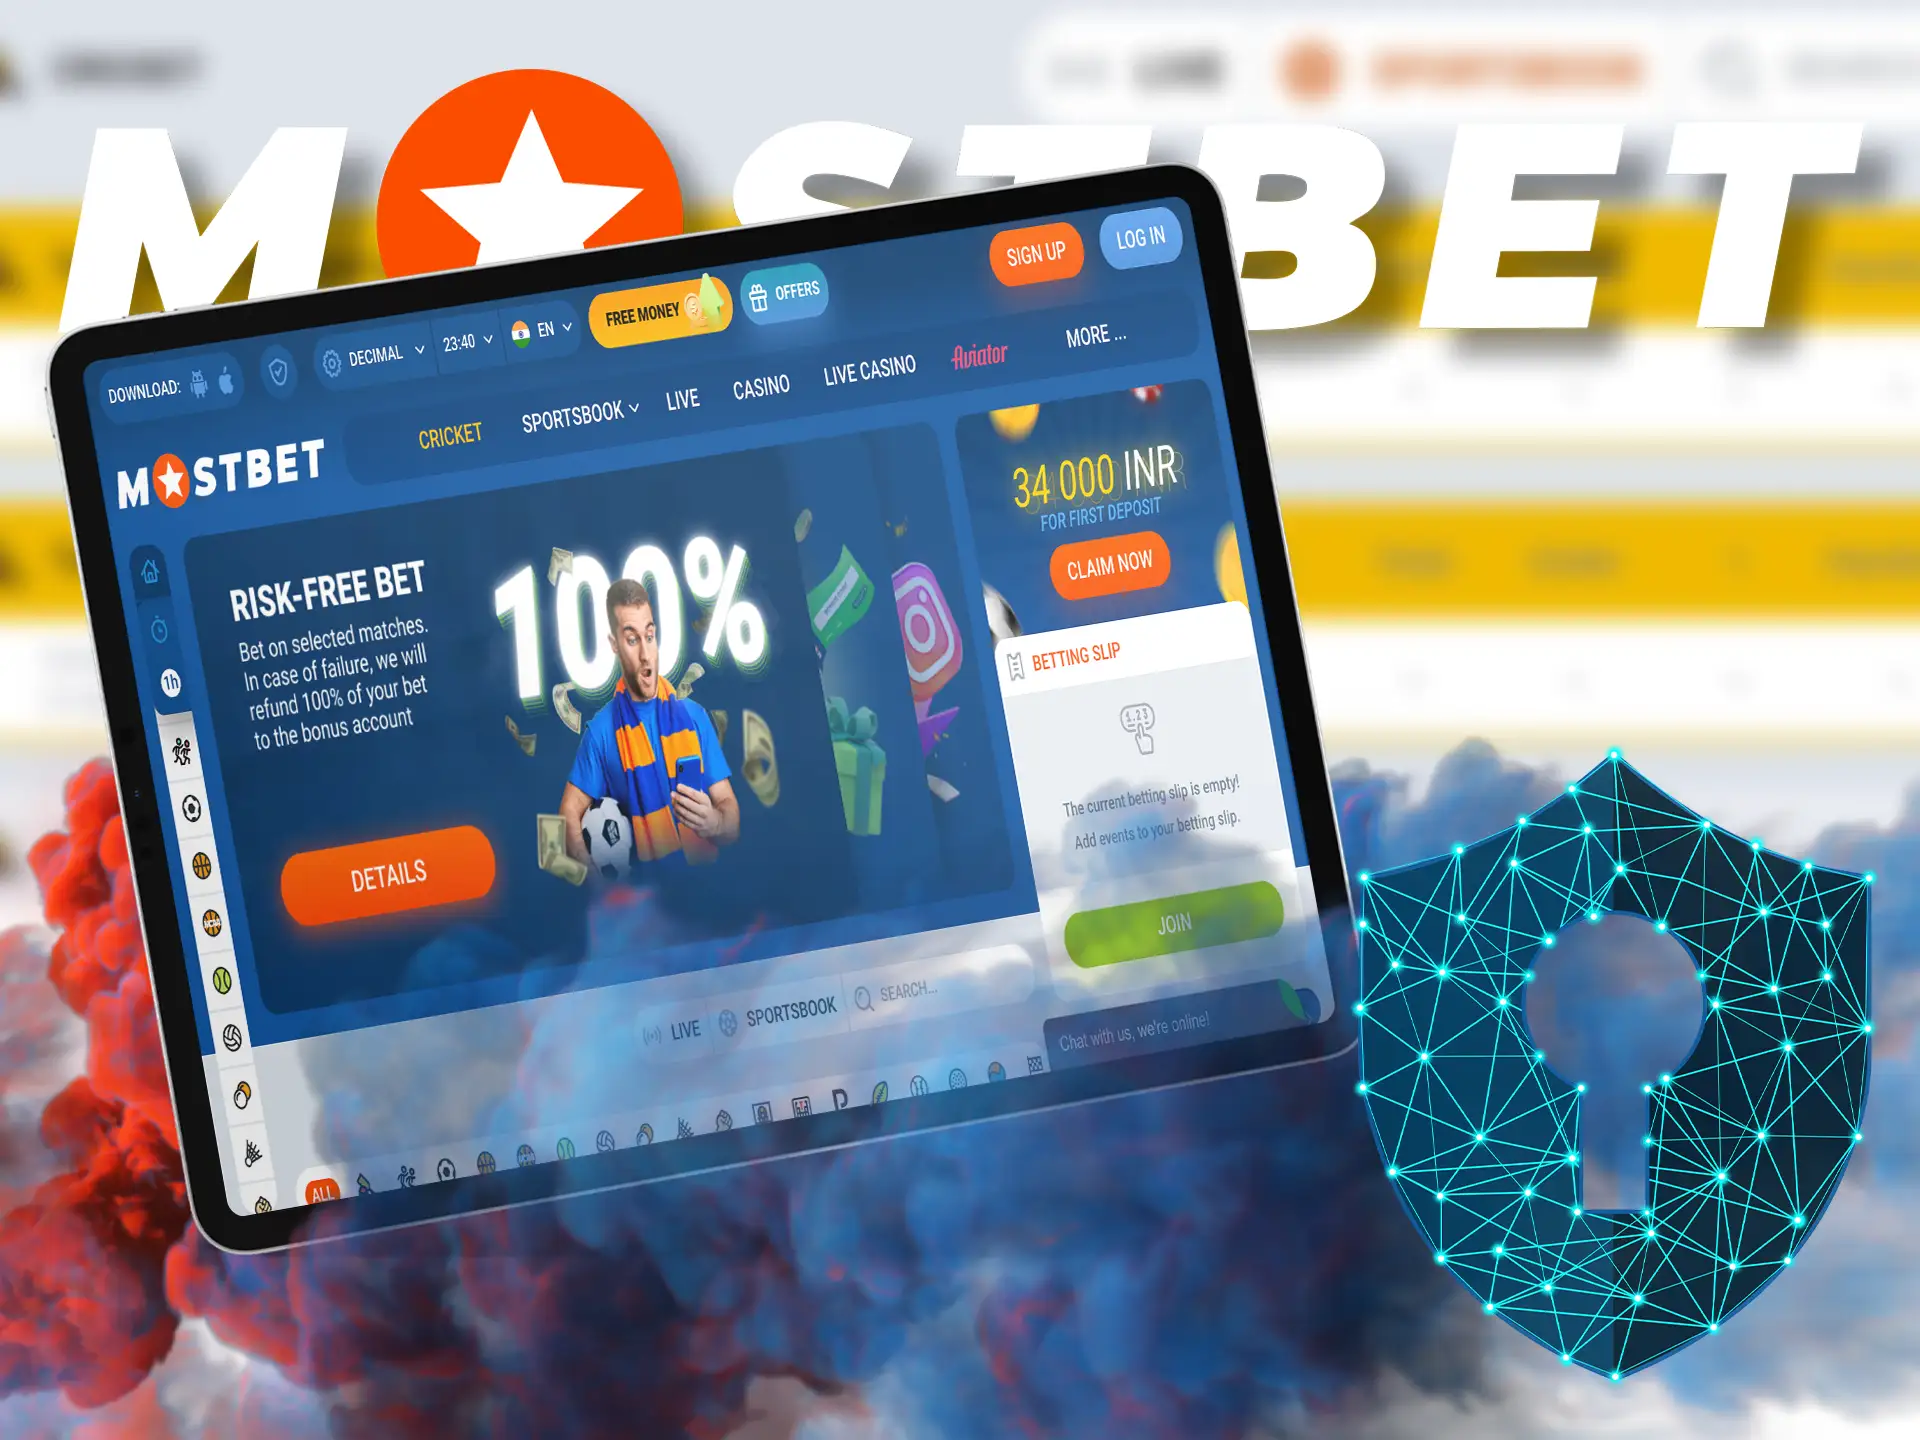 Mostbet Casino operates completely legally, its use is completely safe, and it is also verified by regulatory authorities.